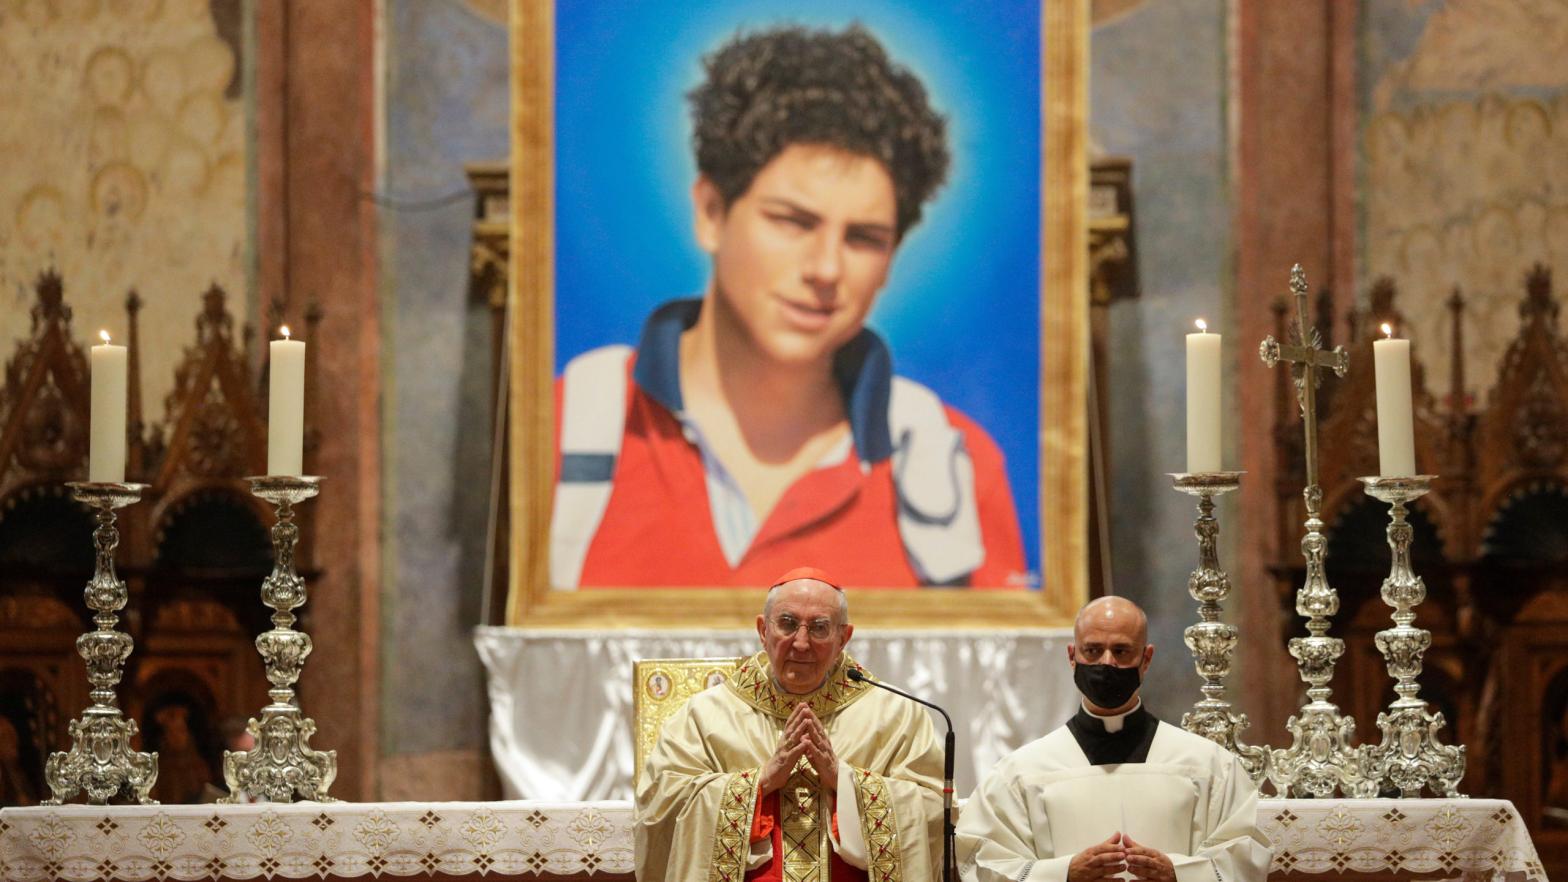 Image of 15-year-old Carlos Acutis is displayed at his beatification ceremony at the St. Francis Basilica on October 10th, 2020.  (Photo: Gregorio Borgia, AP)